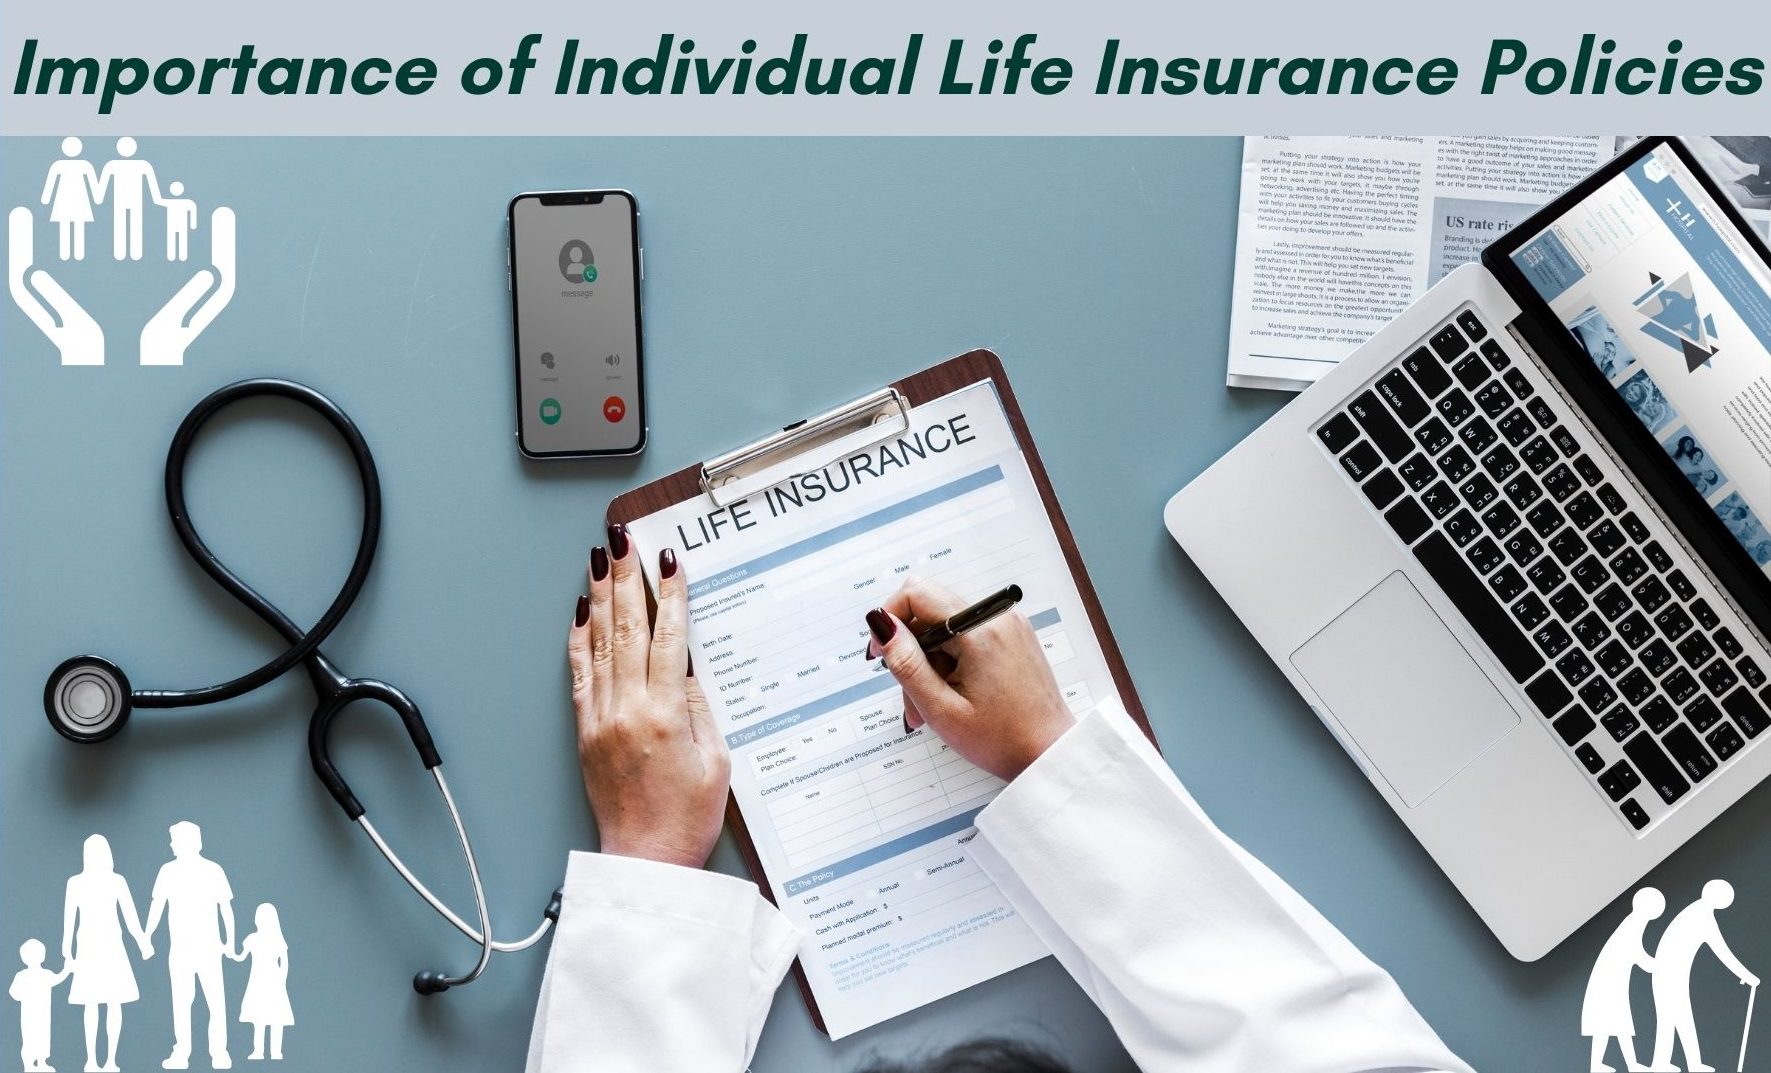 Importance of Individual Life Insurance Policies